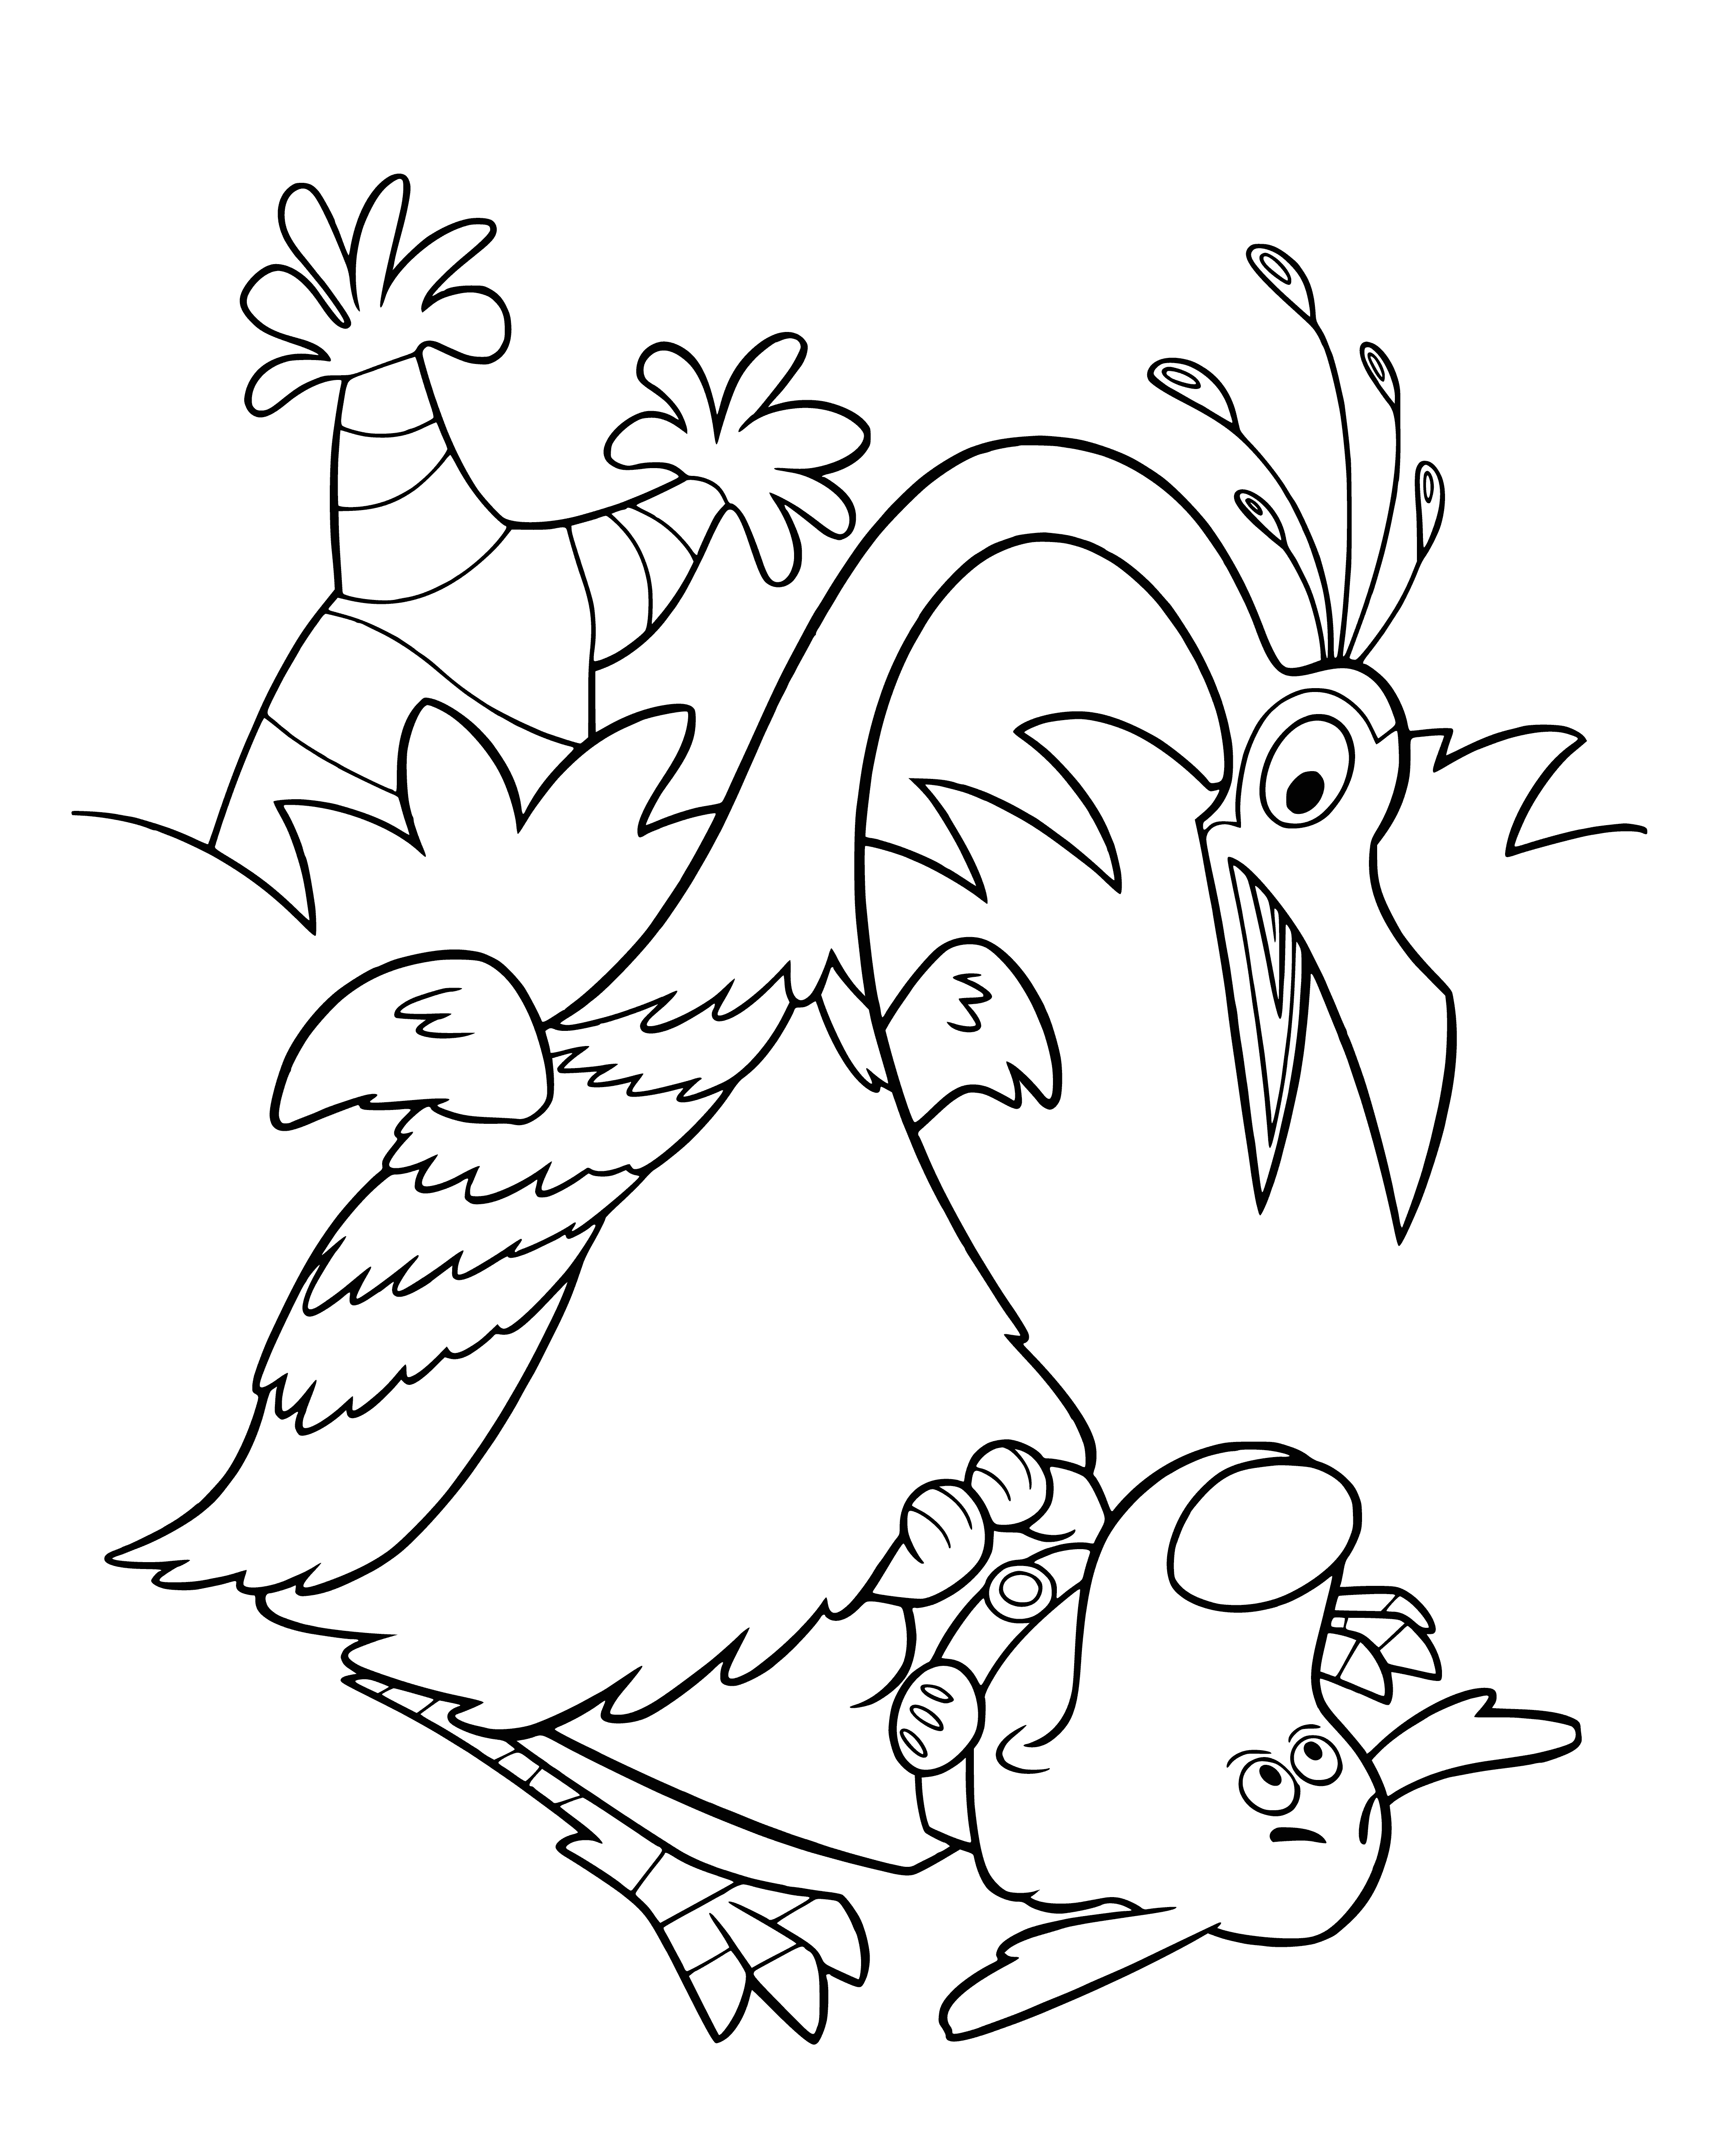 coloring page: A man & woman triumphantly hold a dead duck in the dark forest.